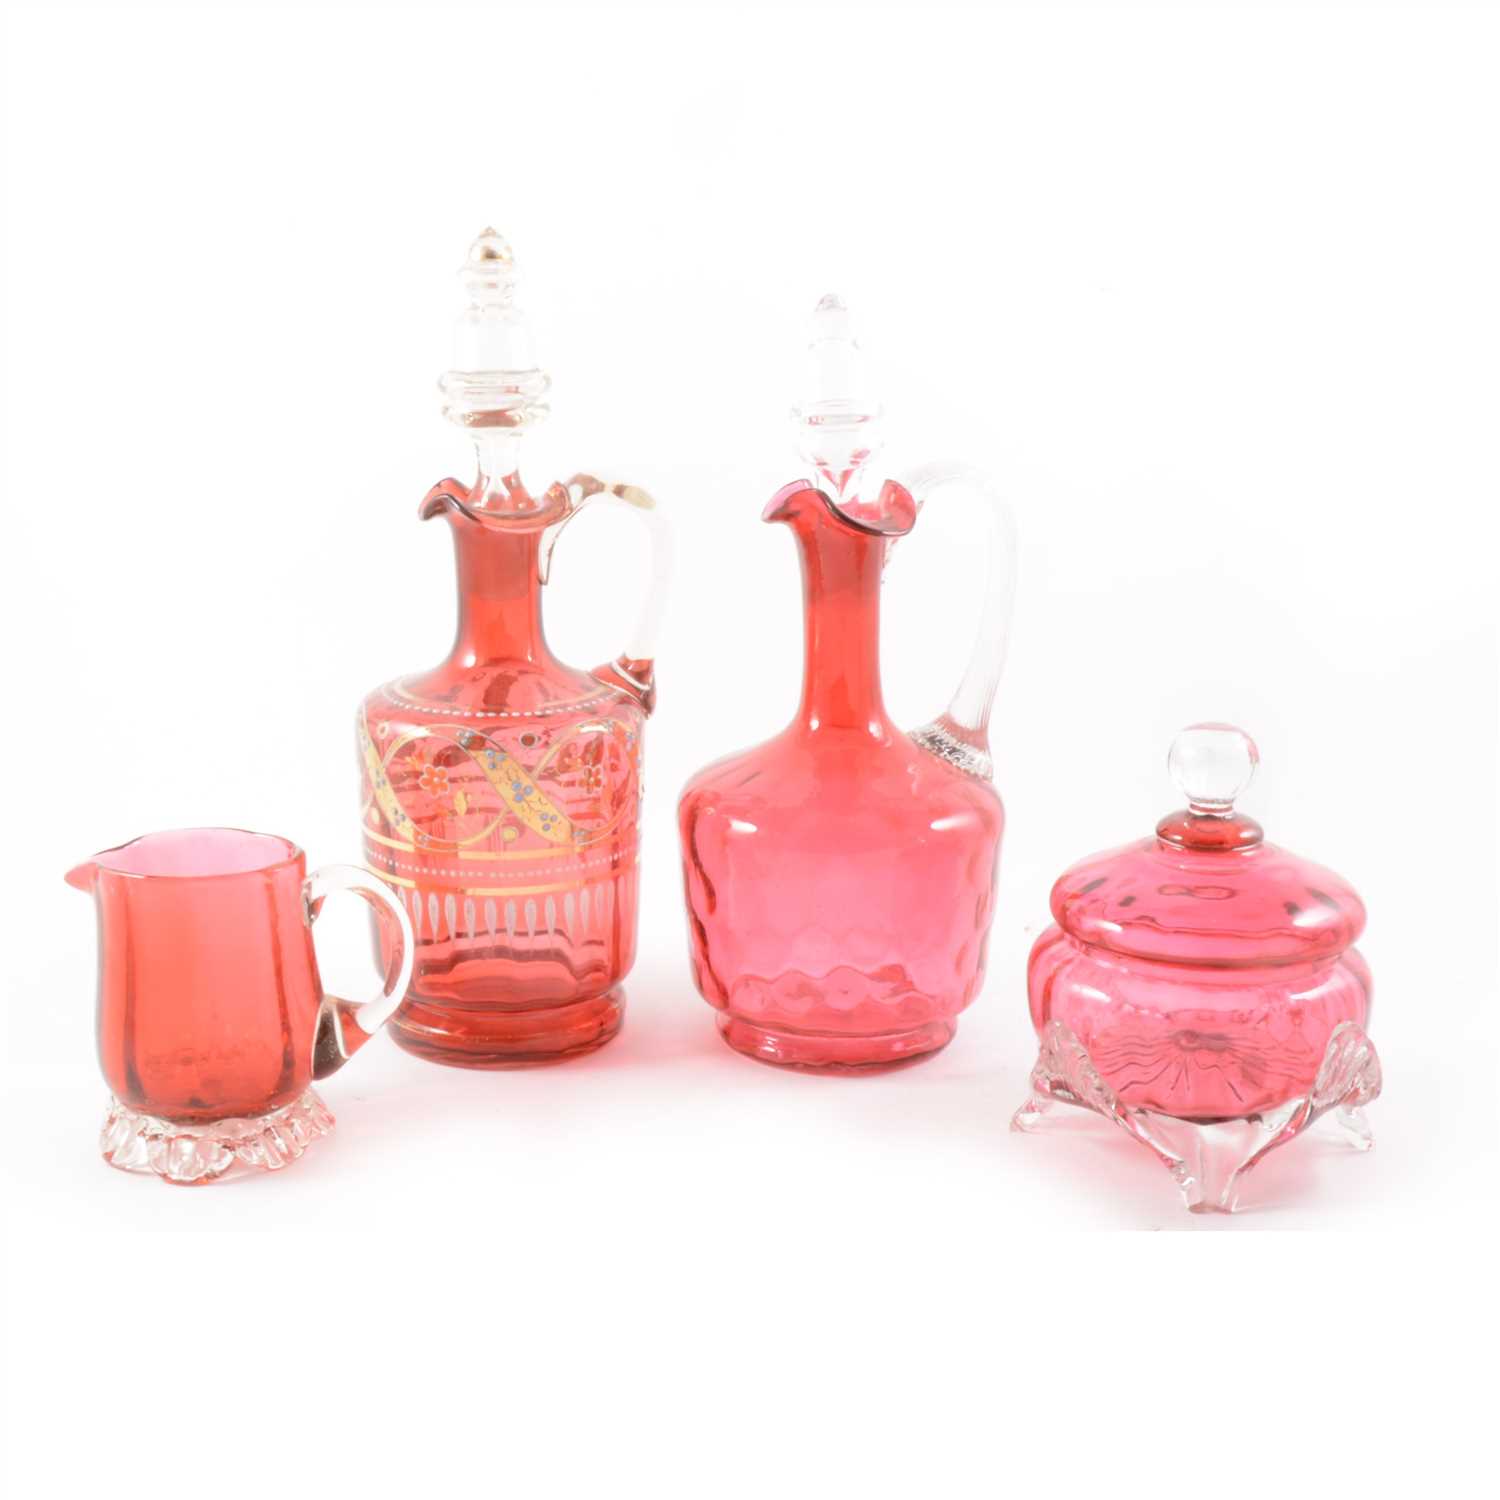 Lot 13 - A Cranberry glass claret jug and other cranberry items